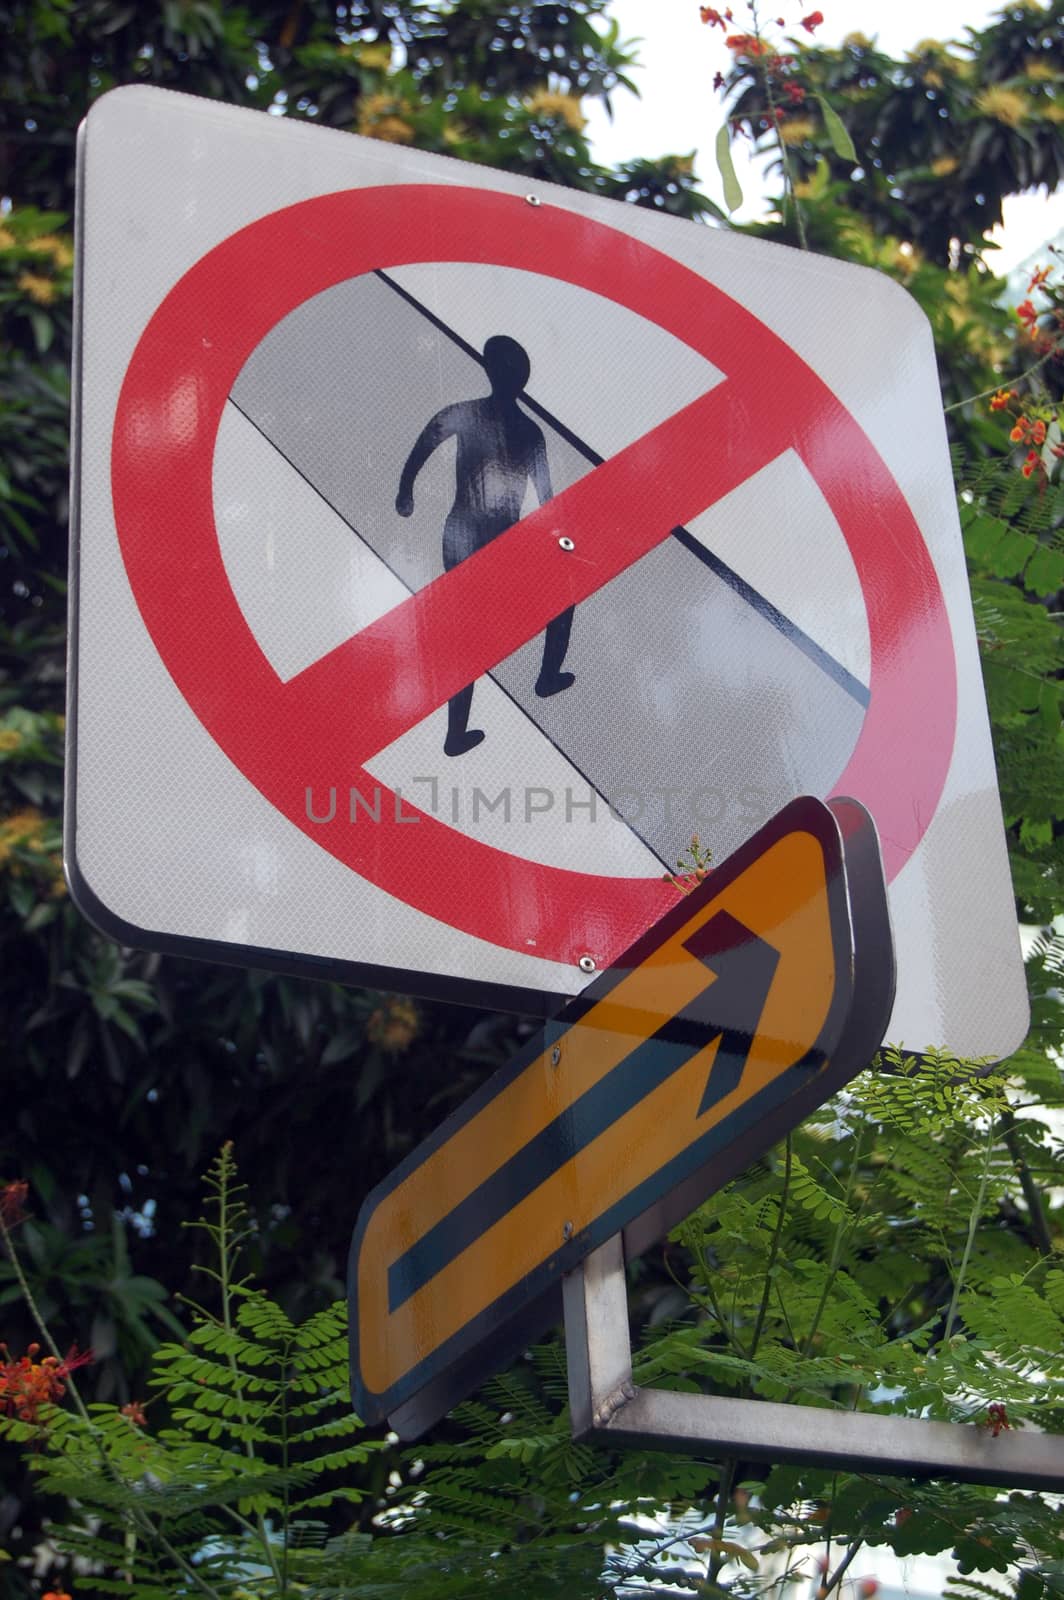 Prohibiting pedestrian road sign with arrow symbol, Singapore